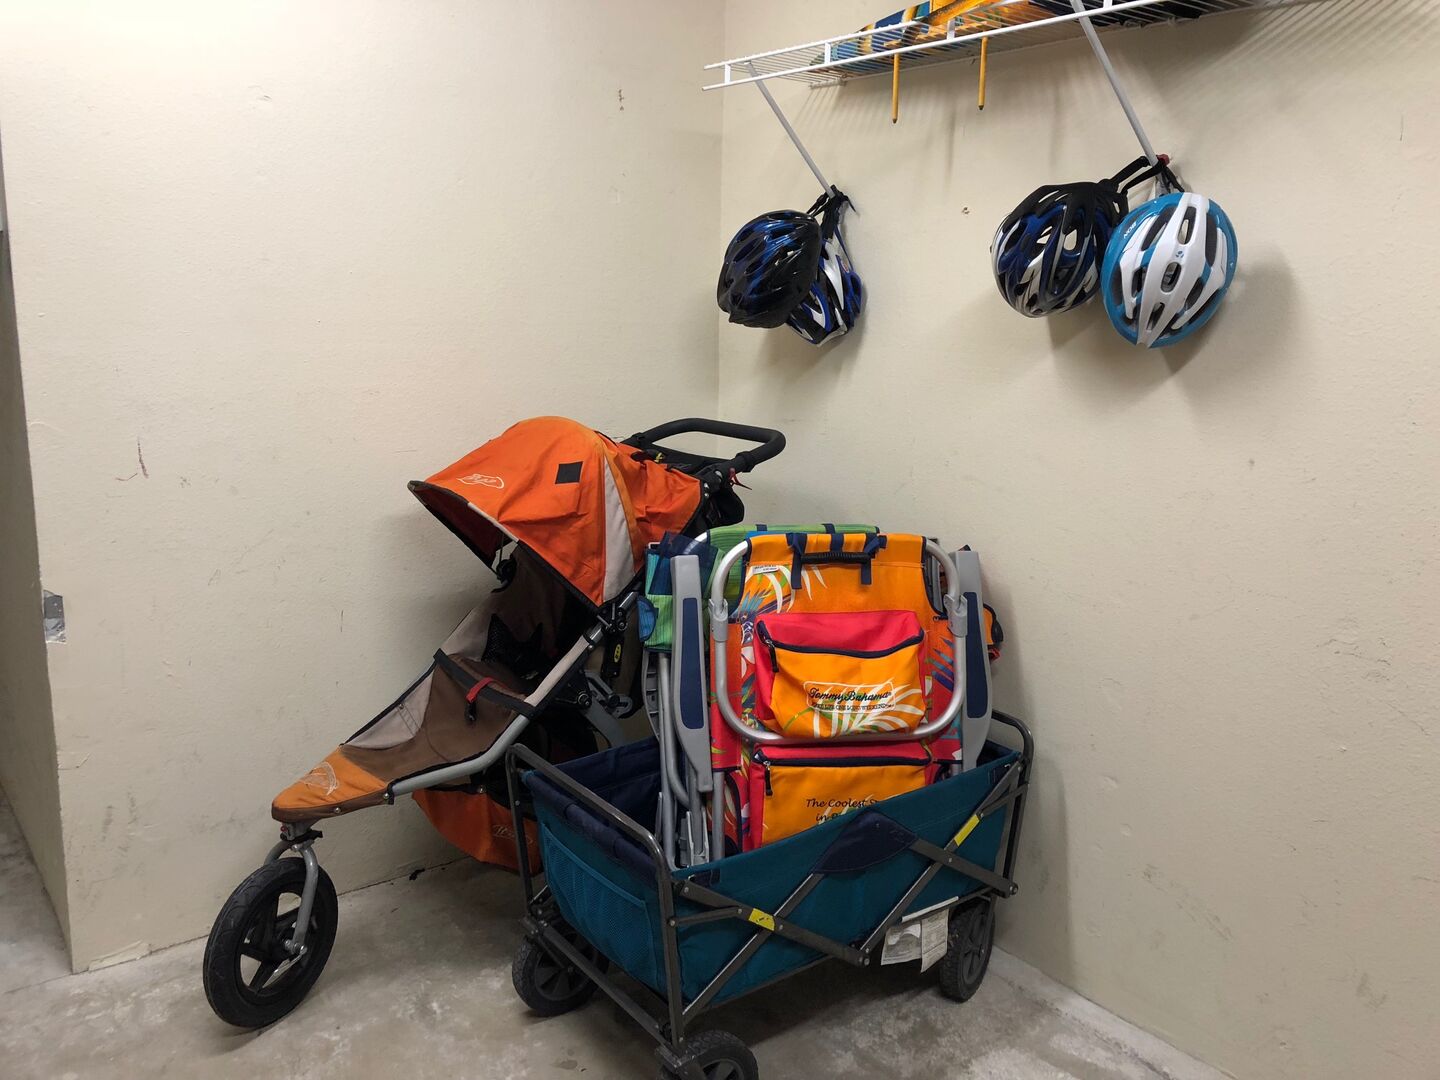 Stroller and wagon with helmets for bikes